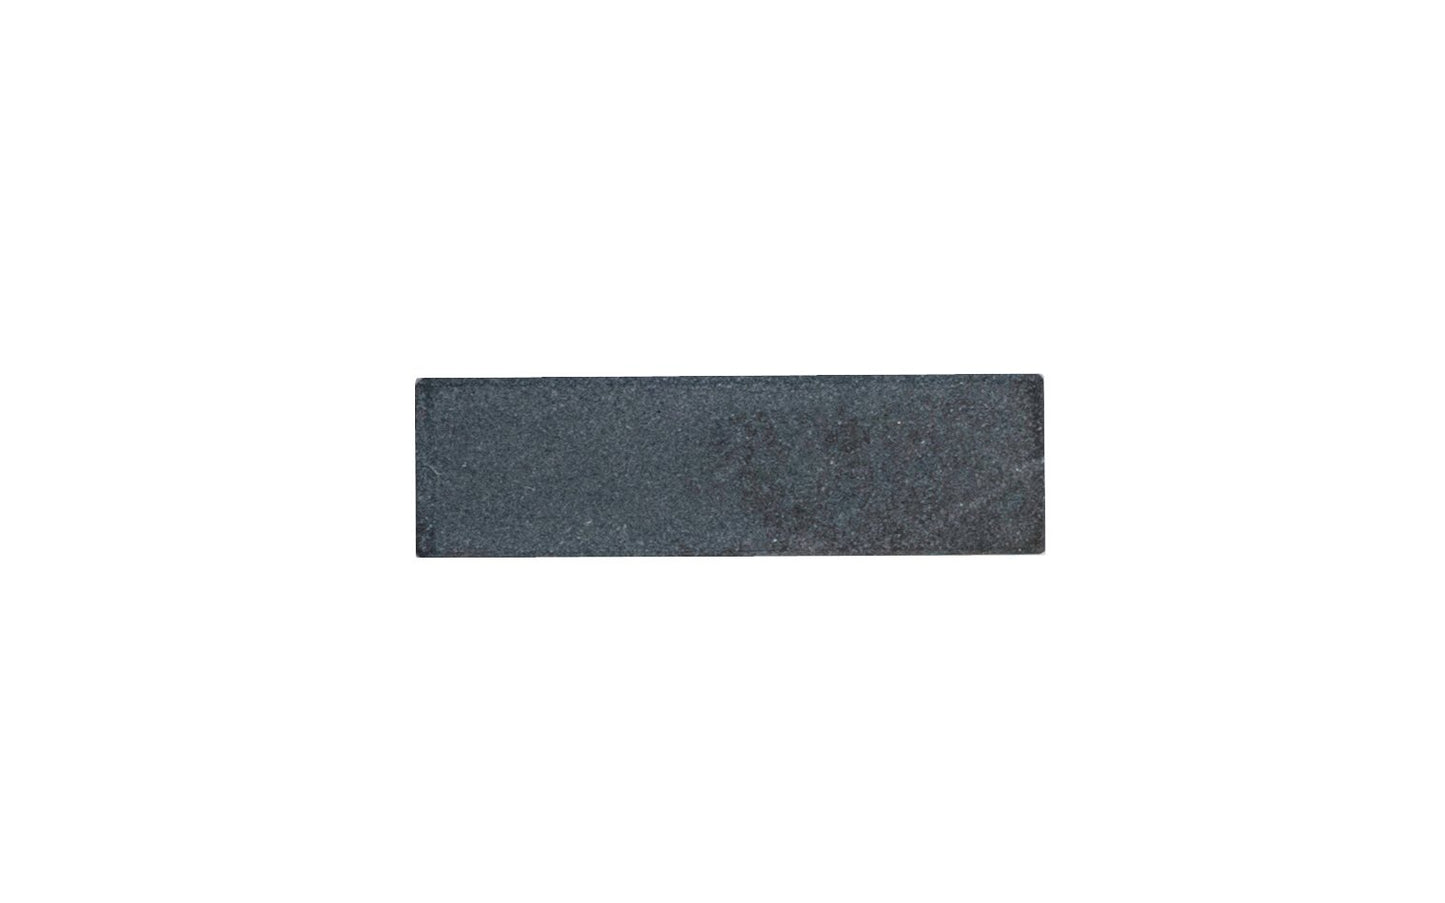 Black Hard Arkansas Slip Stone ~ 3" x 1" x 1/4" - Super-fine stone, it is sometimes referred to as the "Surgical Black Arkansas Stone". It is great for putting an ultimate edge on your tools & knives. Many people use the Black Hard Arkansas Stone for the final finish on blades - Made in USA - Model No. BAP-14A-T